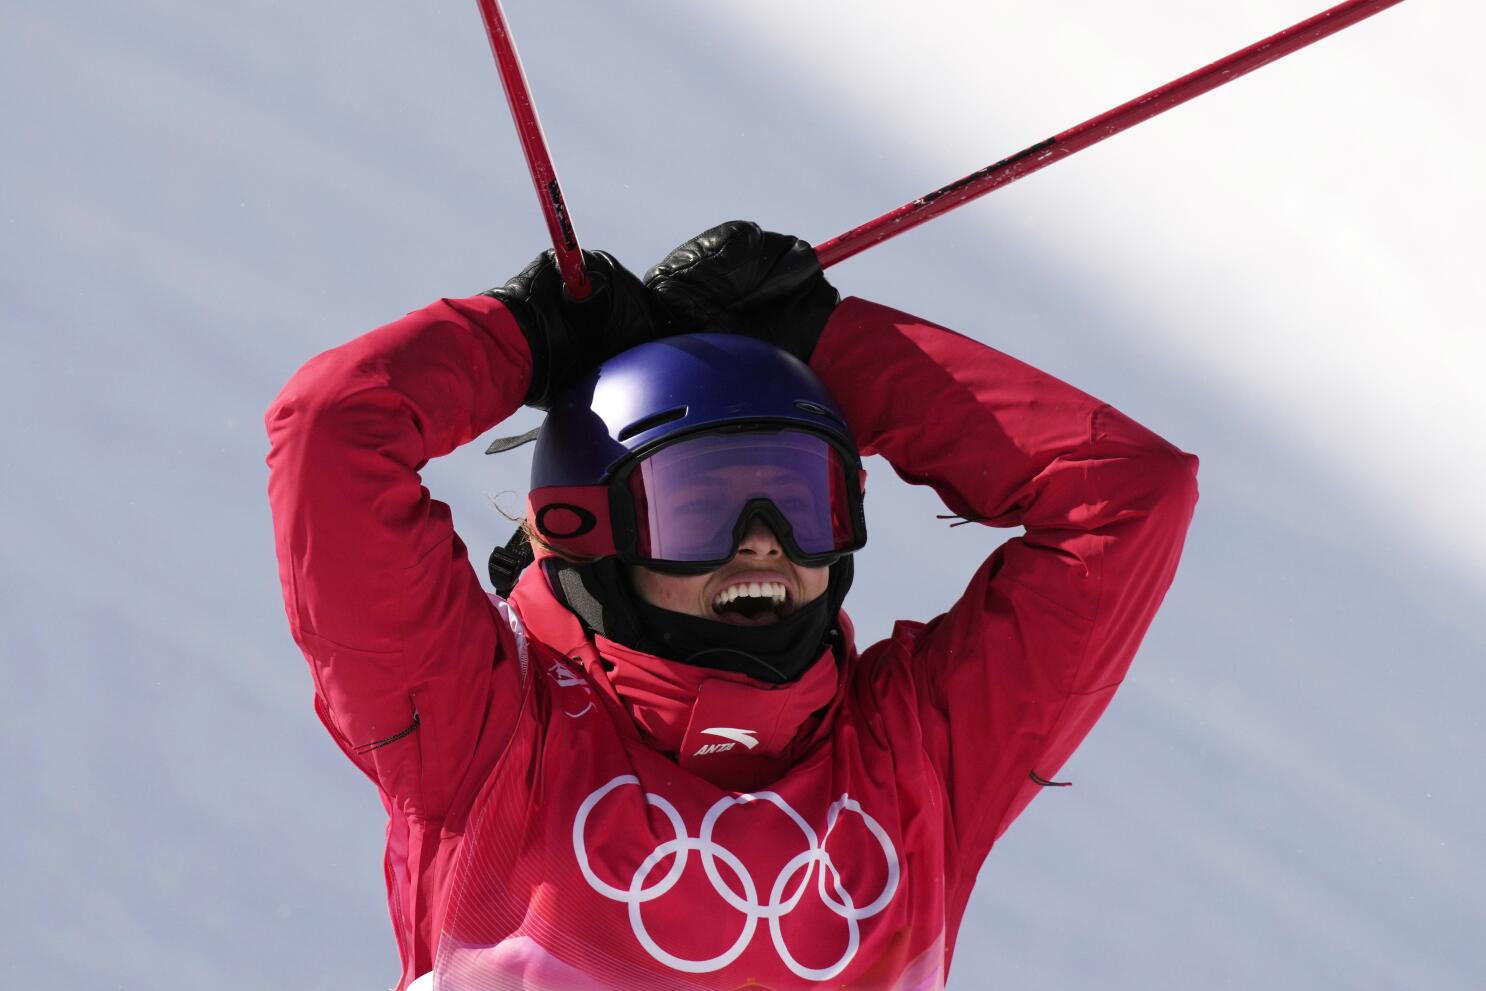 Eileen Gu Wins Gold in Big Air With a Trick She Had Never Tried